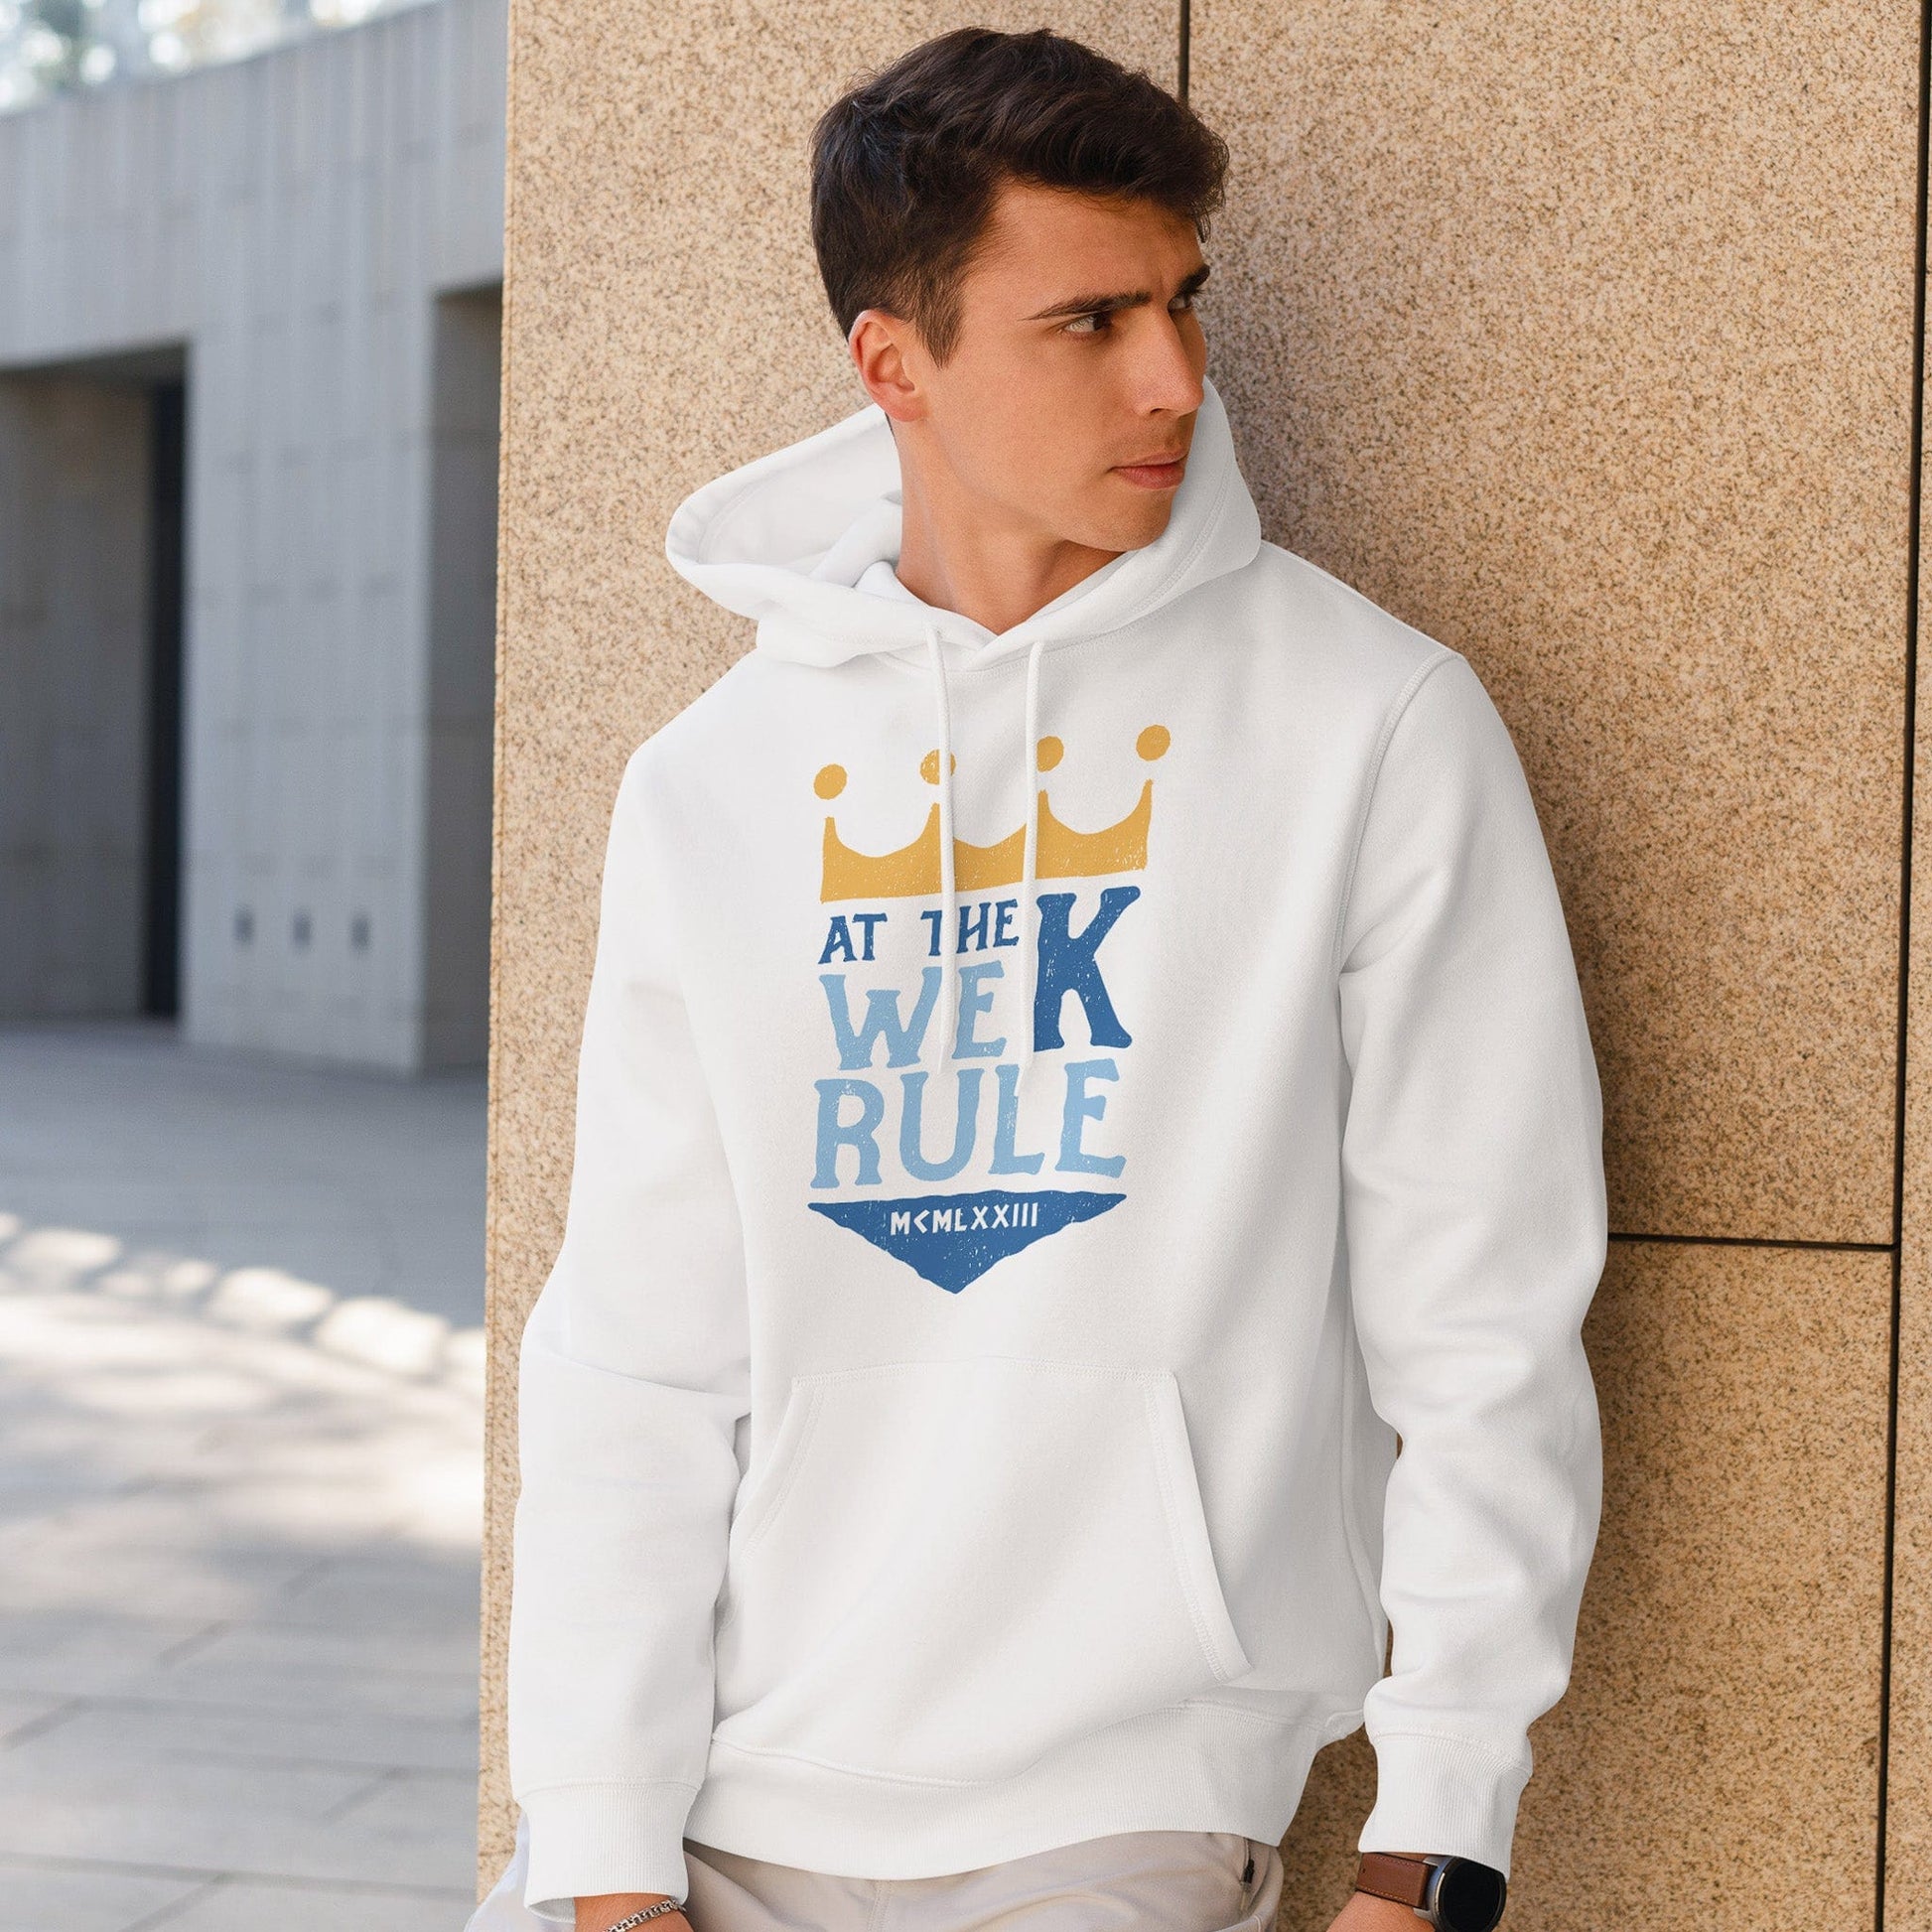 KC Swag | Kansas City Royals blue/gold AT THE K WE RULE on white sponge-fleece pullover hoodie worn by male model leaning against stone wall in outdoor plaza